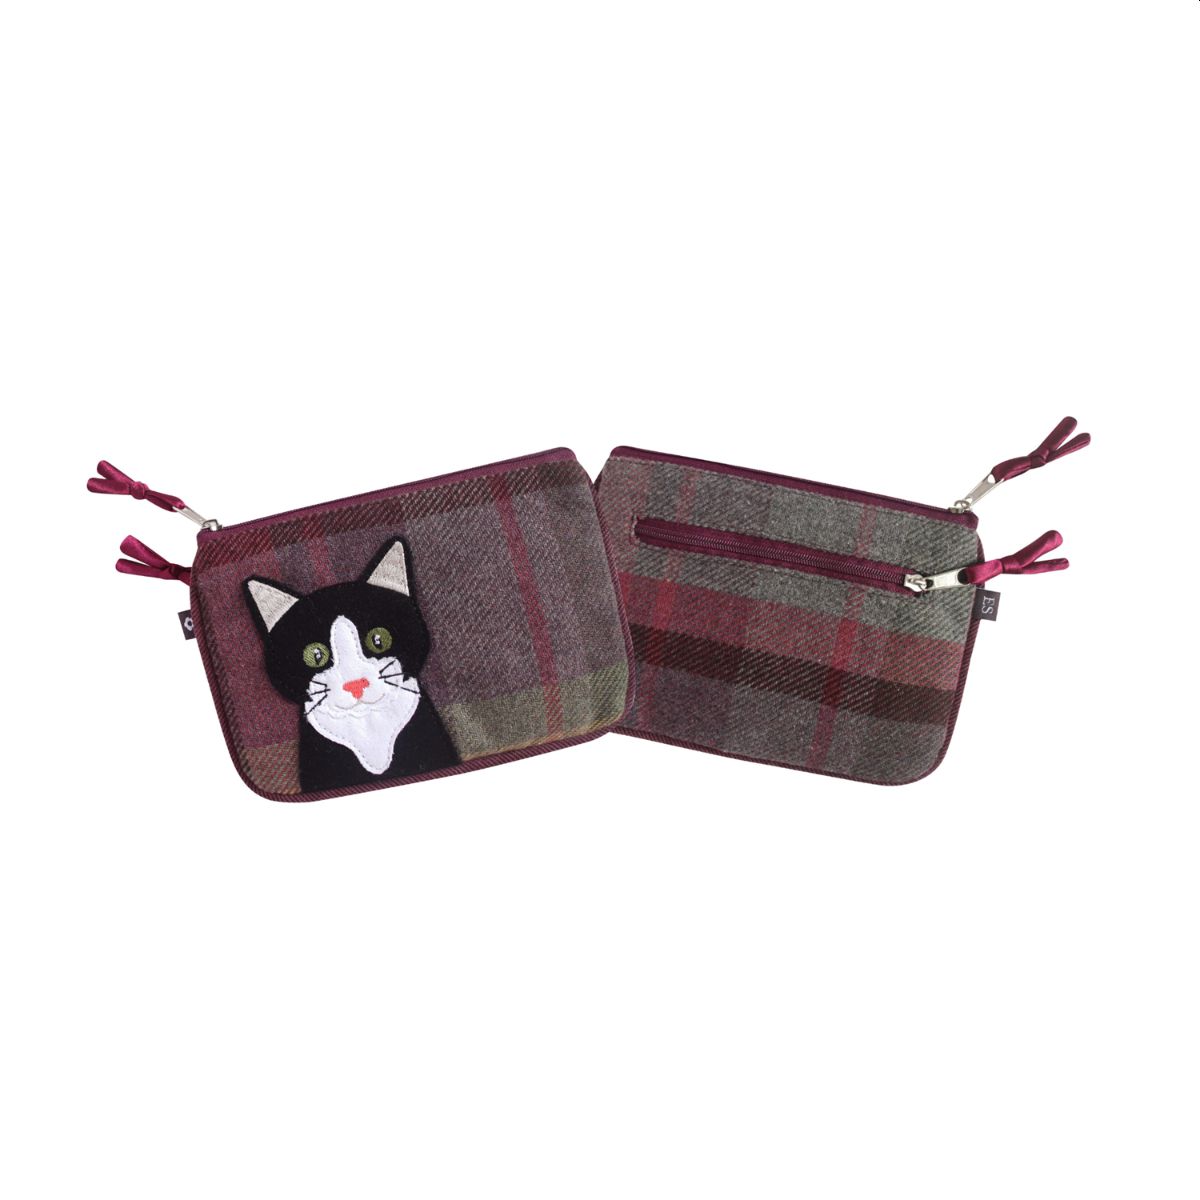 Black and white cat tweed purse